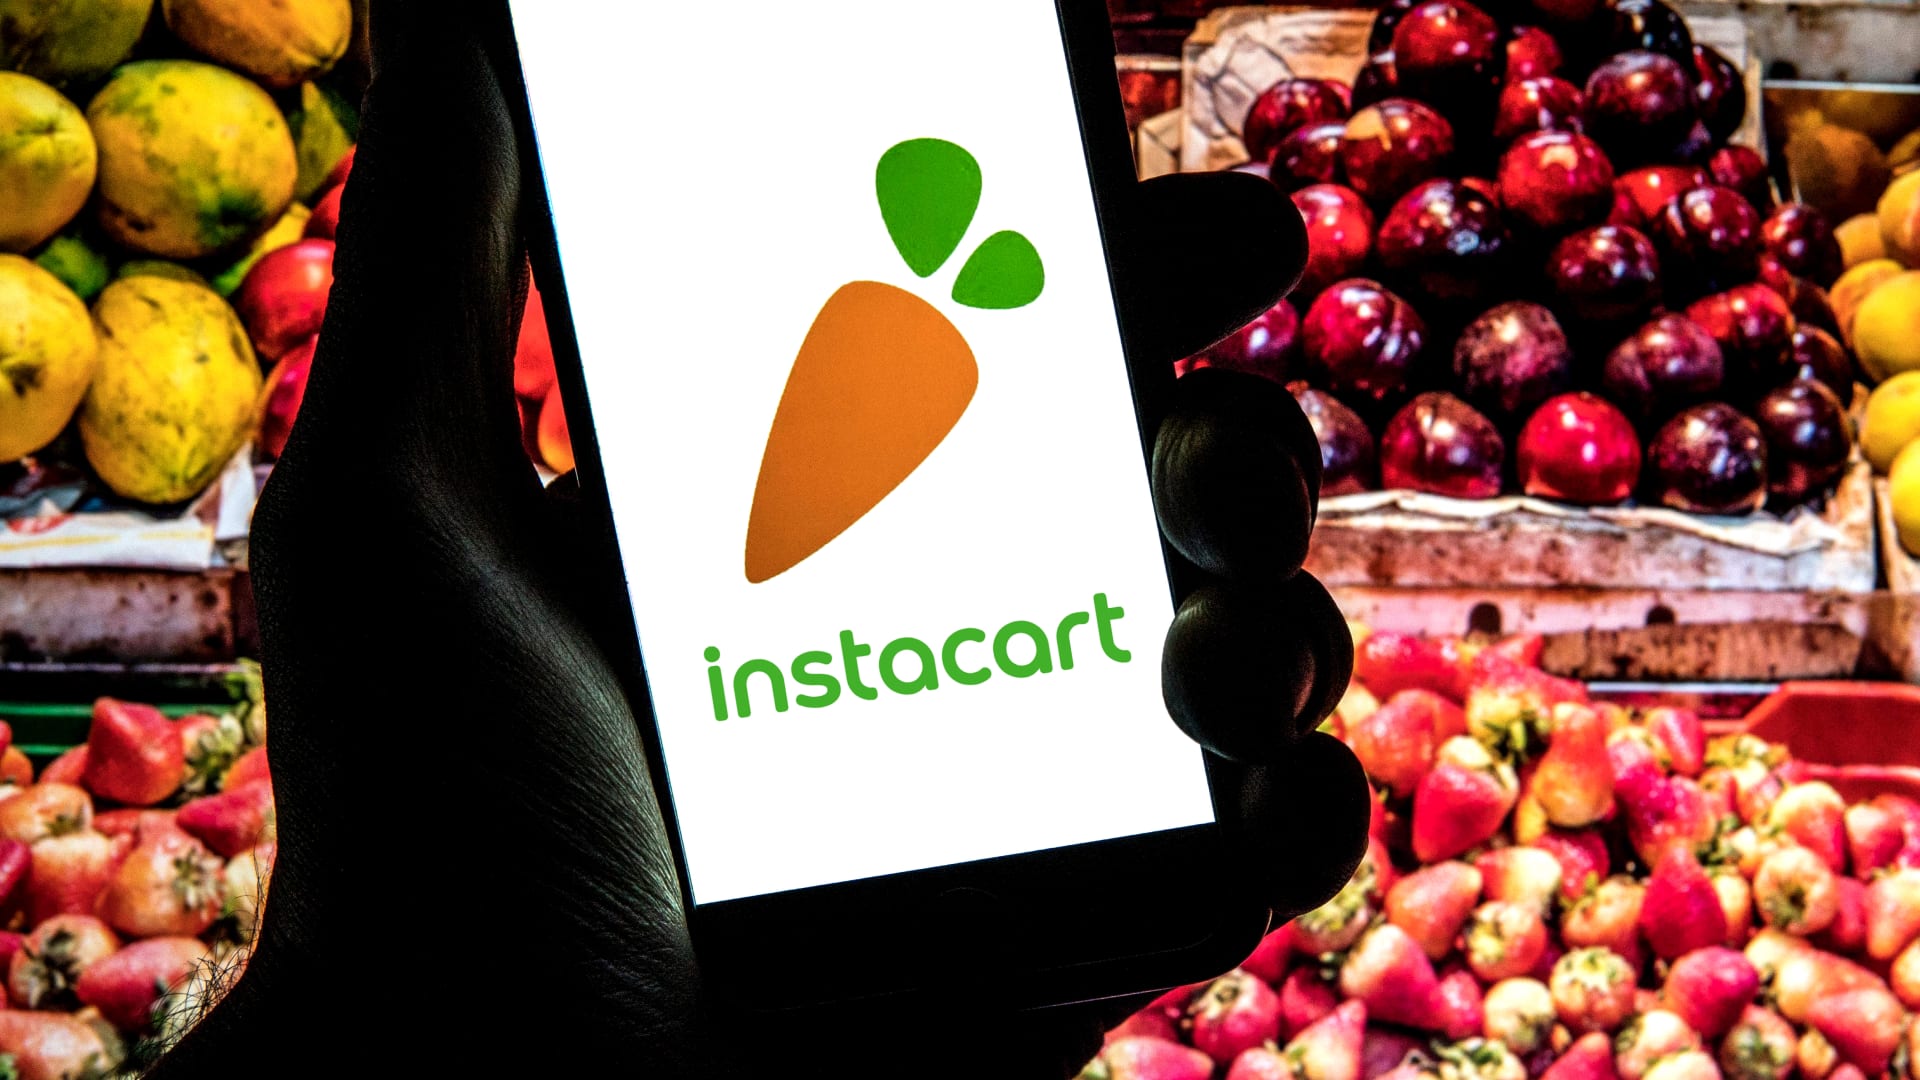 Instacart shares popped 40% in their Nasdaq debut on Tuesday, opening at $42, after the grocery delivery company's long-awaited IPO. The offering